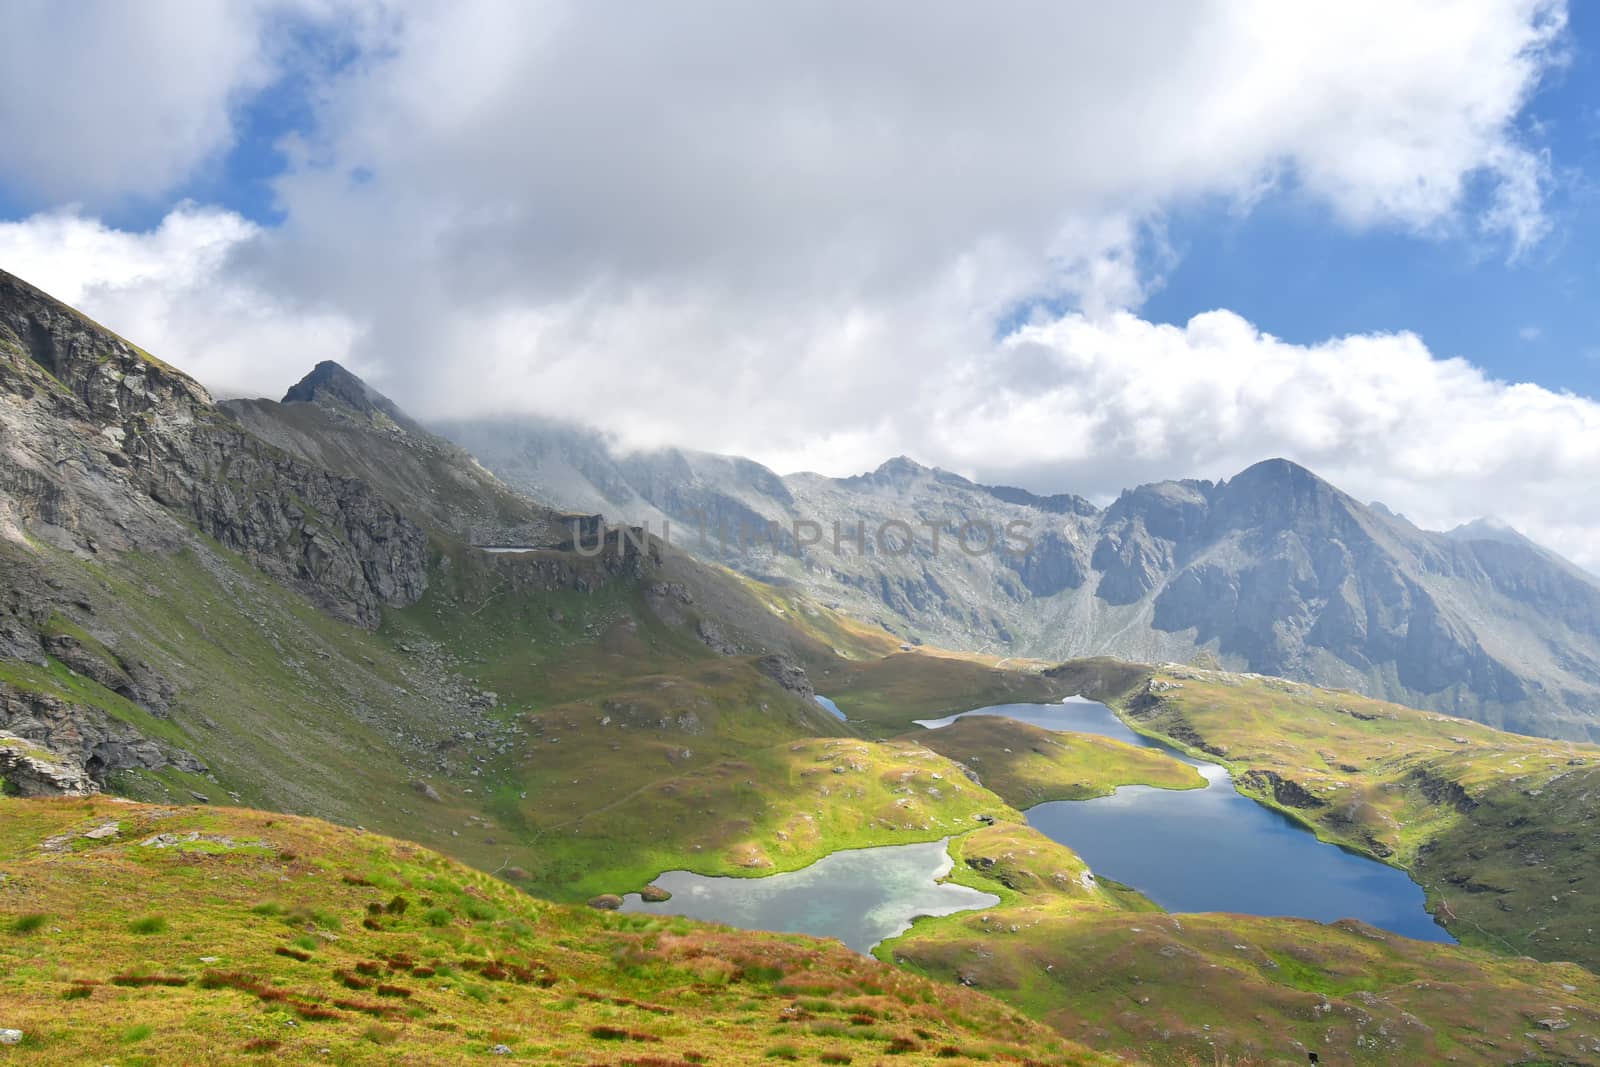 The Palasinaz lakes in the upper Champoluc valley.